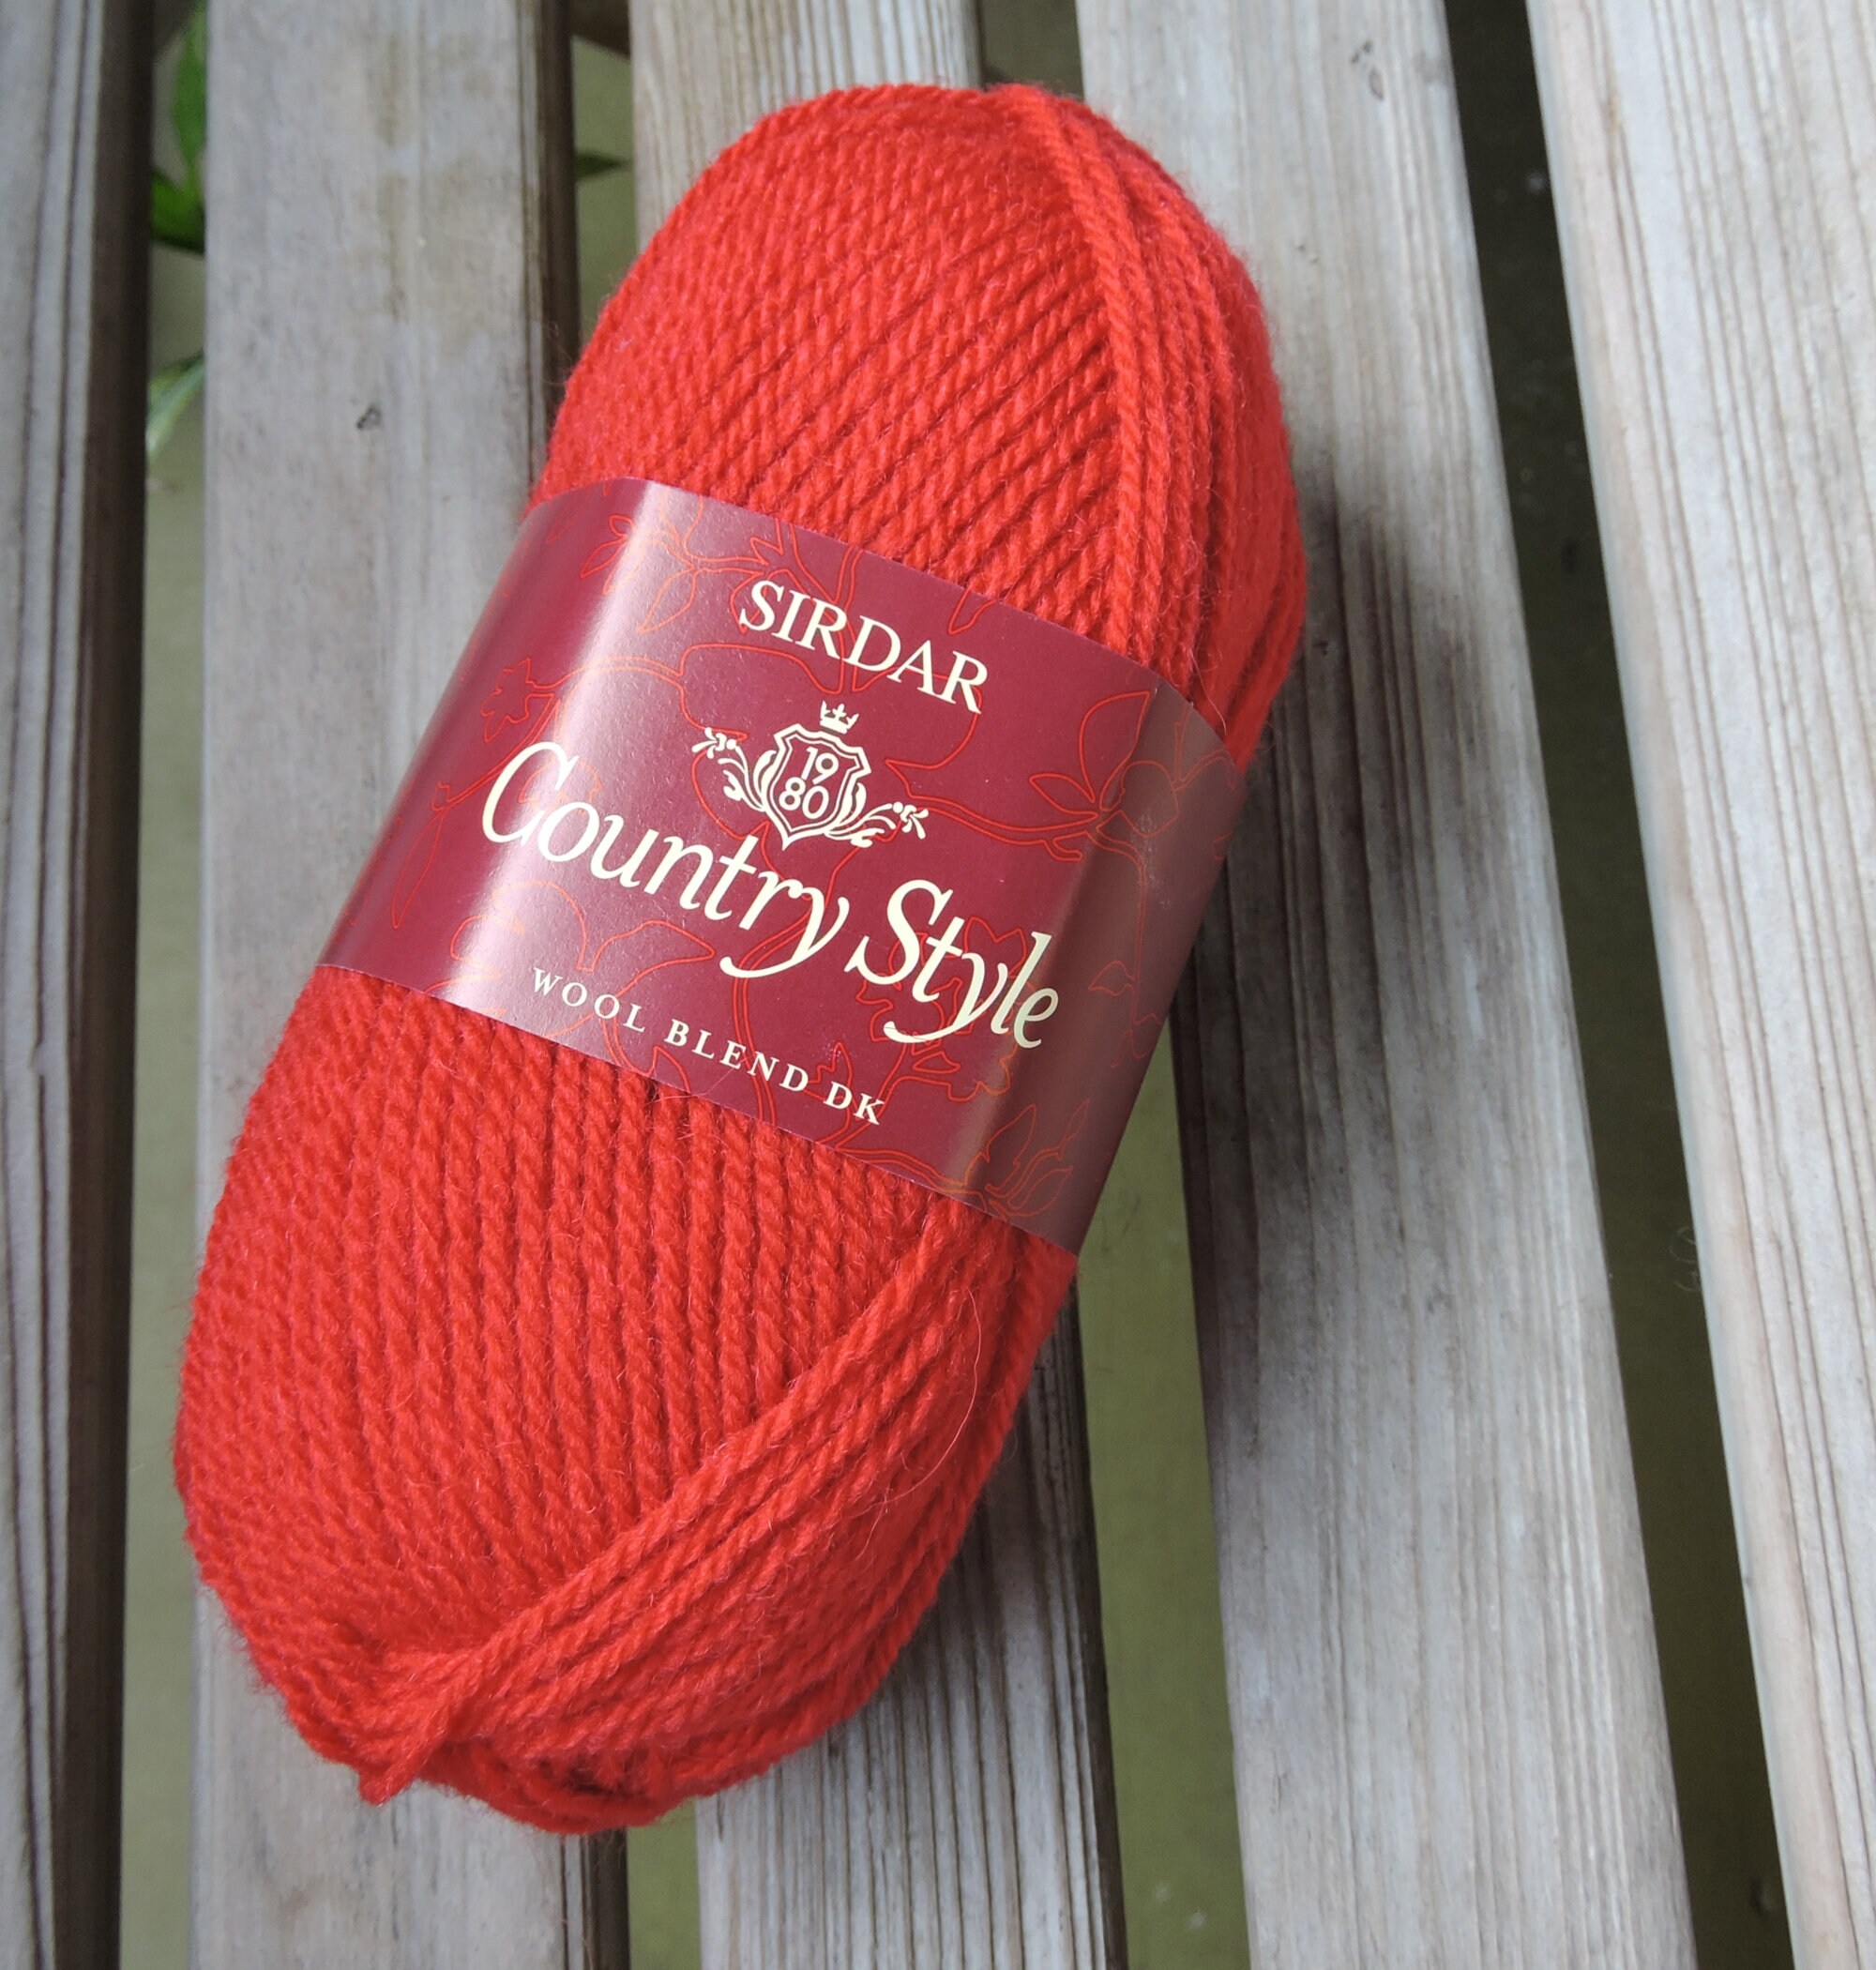 Cherry Red - 4 ply Aran weight Domestic Wool